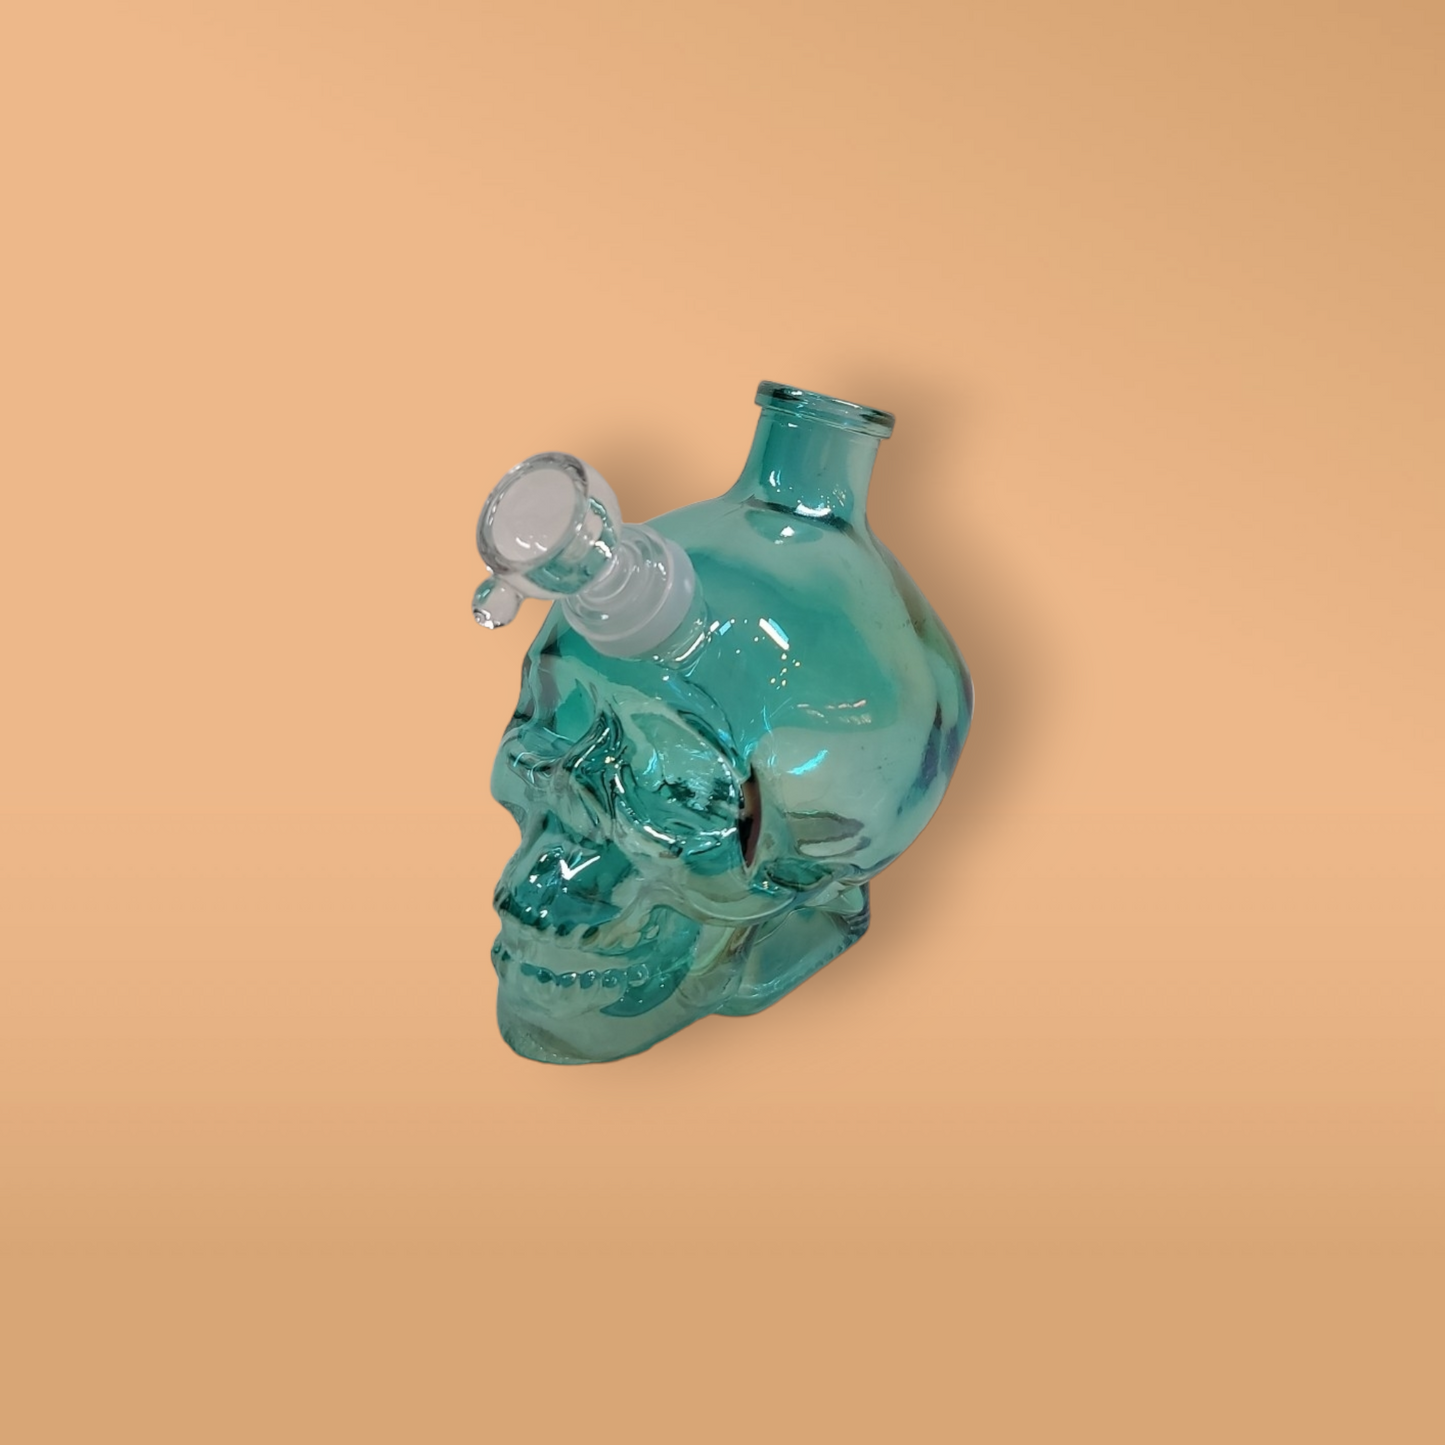 Deluxe Blue Skull (with banger, carb cap, bowl piece, and mouth extension)